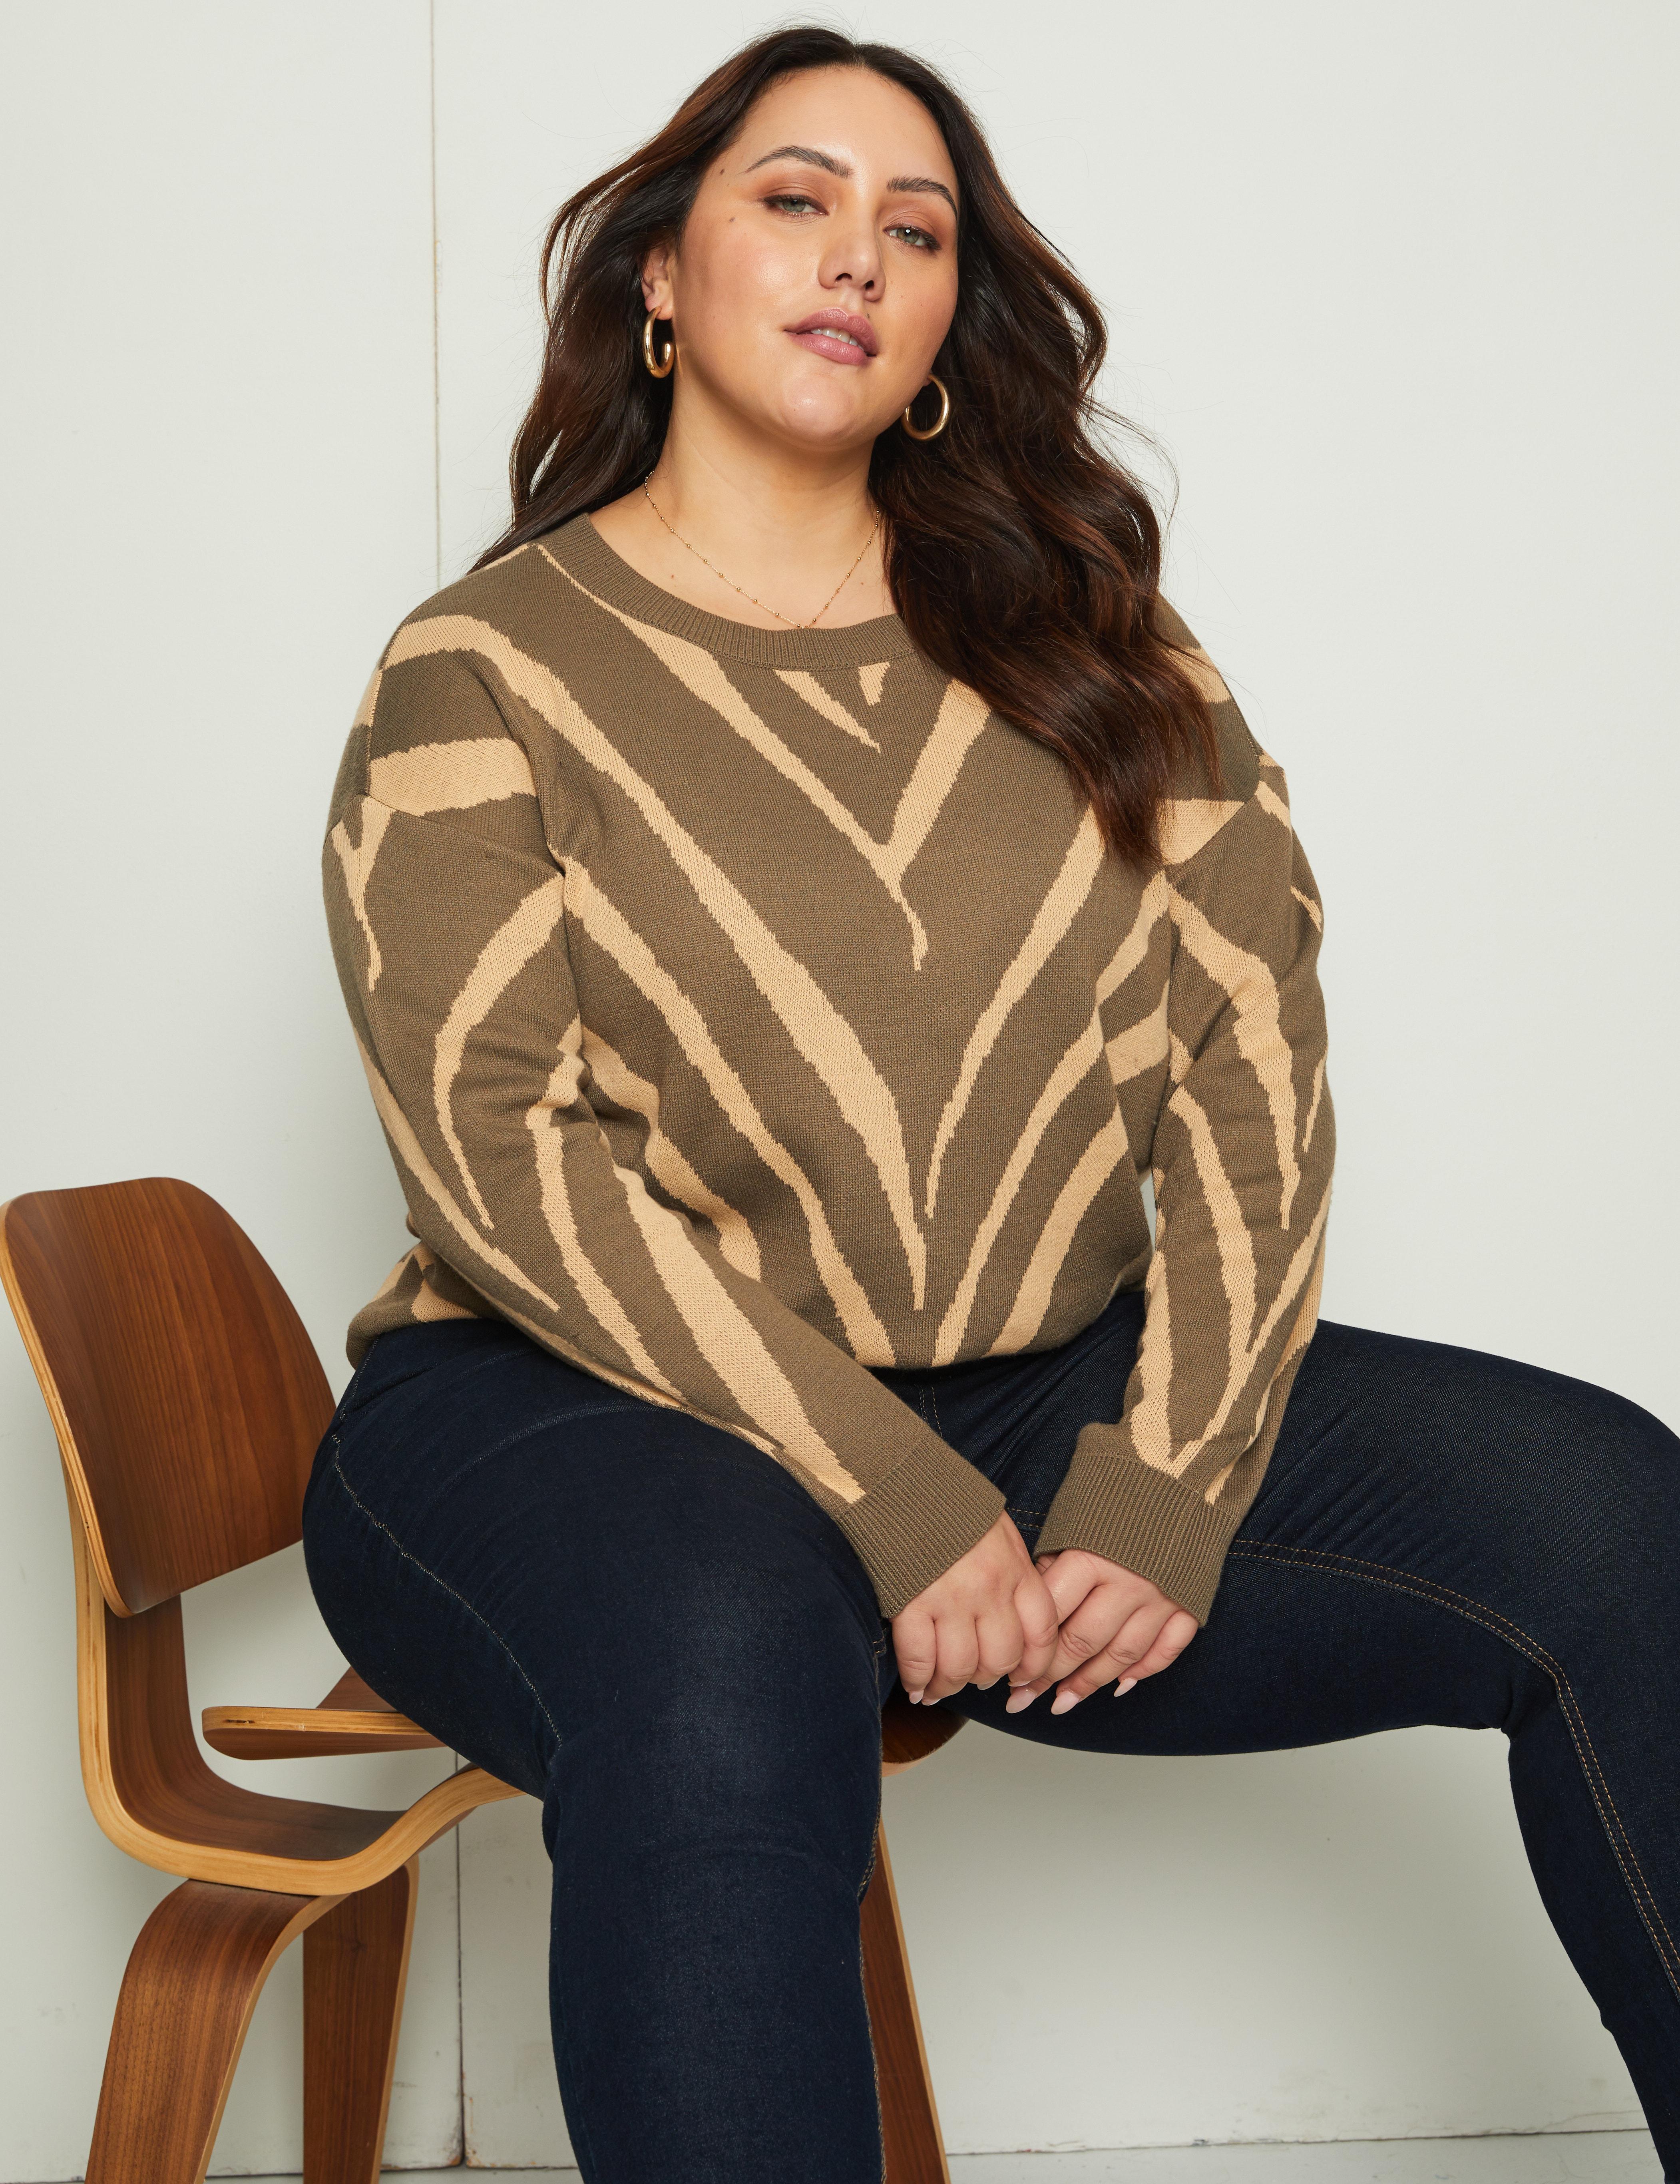 BeMe - Plus Size - Womens Jumper - Long Winter Sweater - Beige Pullover - Casual - Knitwear - Long Sleeve - Natural Abstract - Scoop Neck - Work Wear